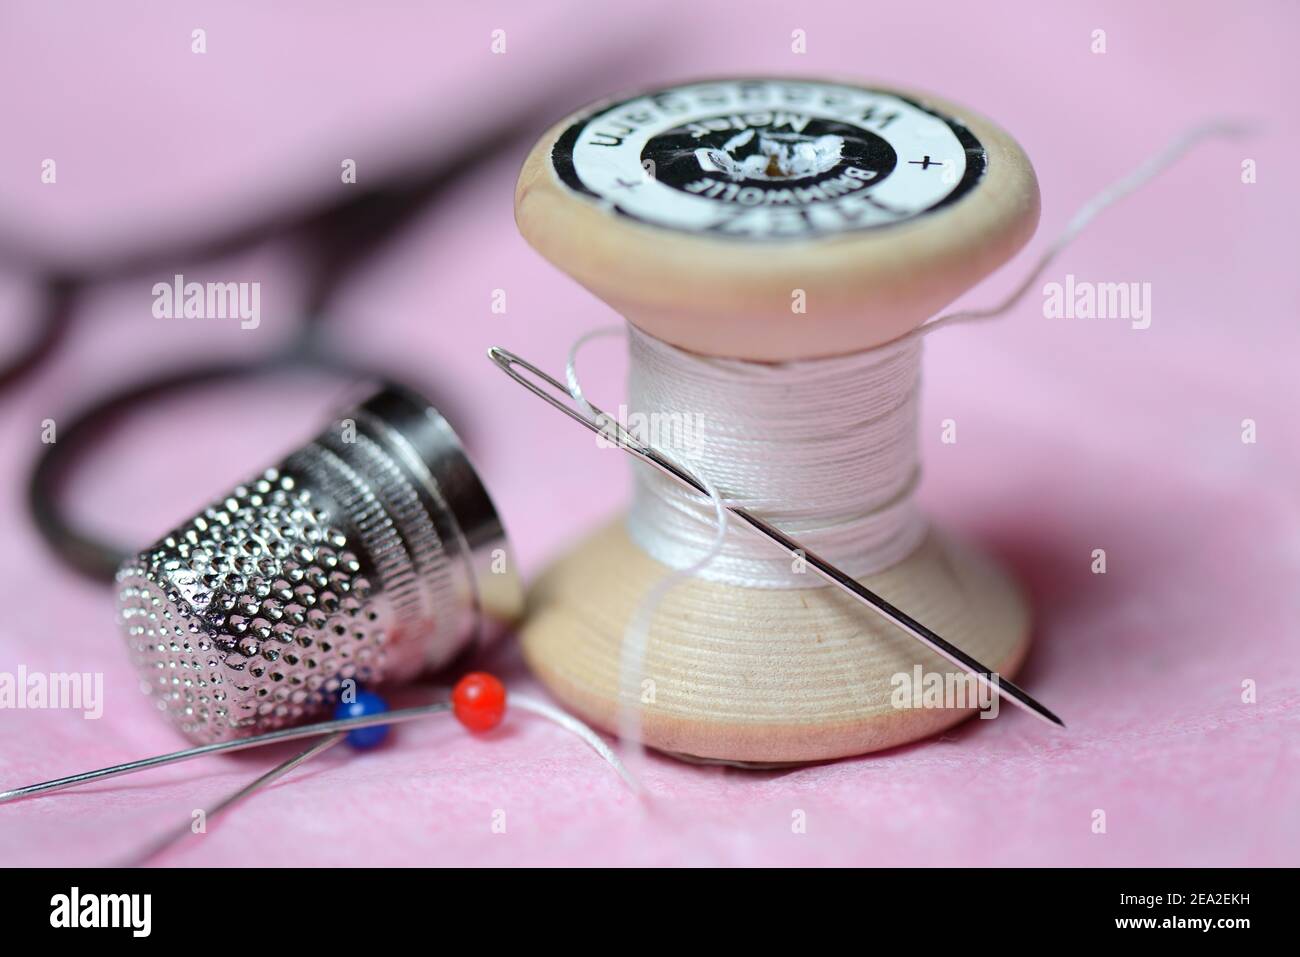 Black Thread Reel with a Needle Stock Photo - Image of object, clothes:  97053206